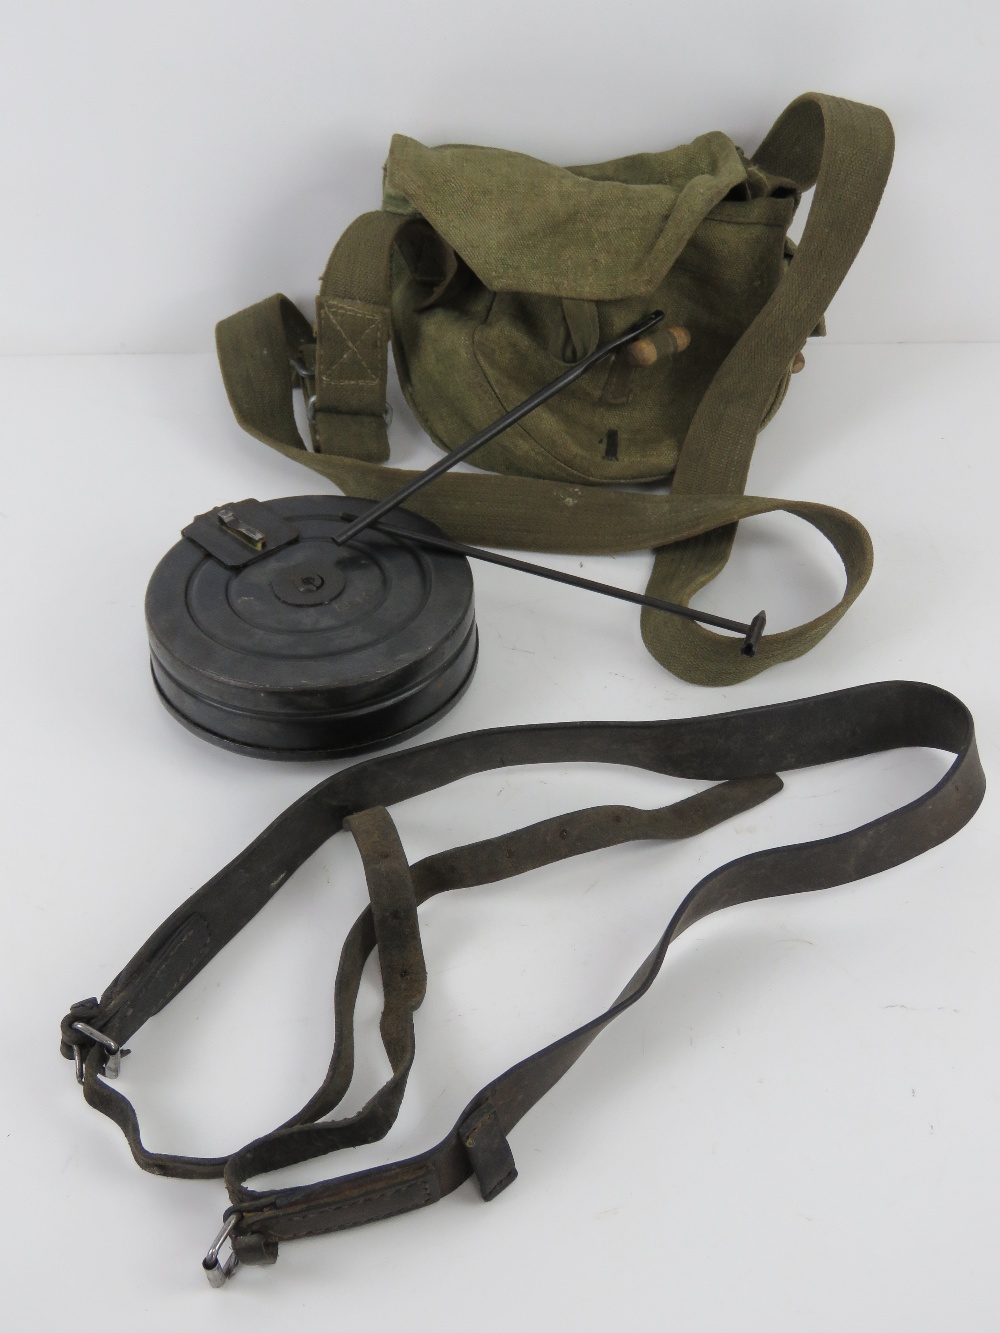 A WWII PPSH-41 leather sling, with magazine, magazine pouch and cleaning rod.